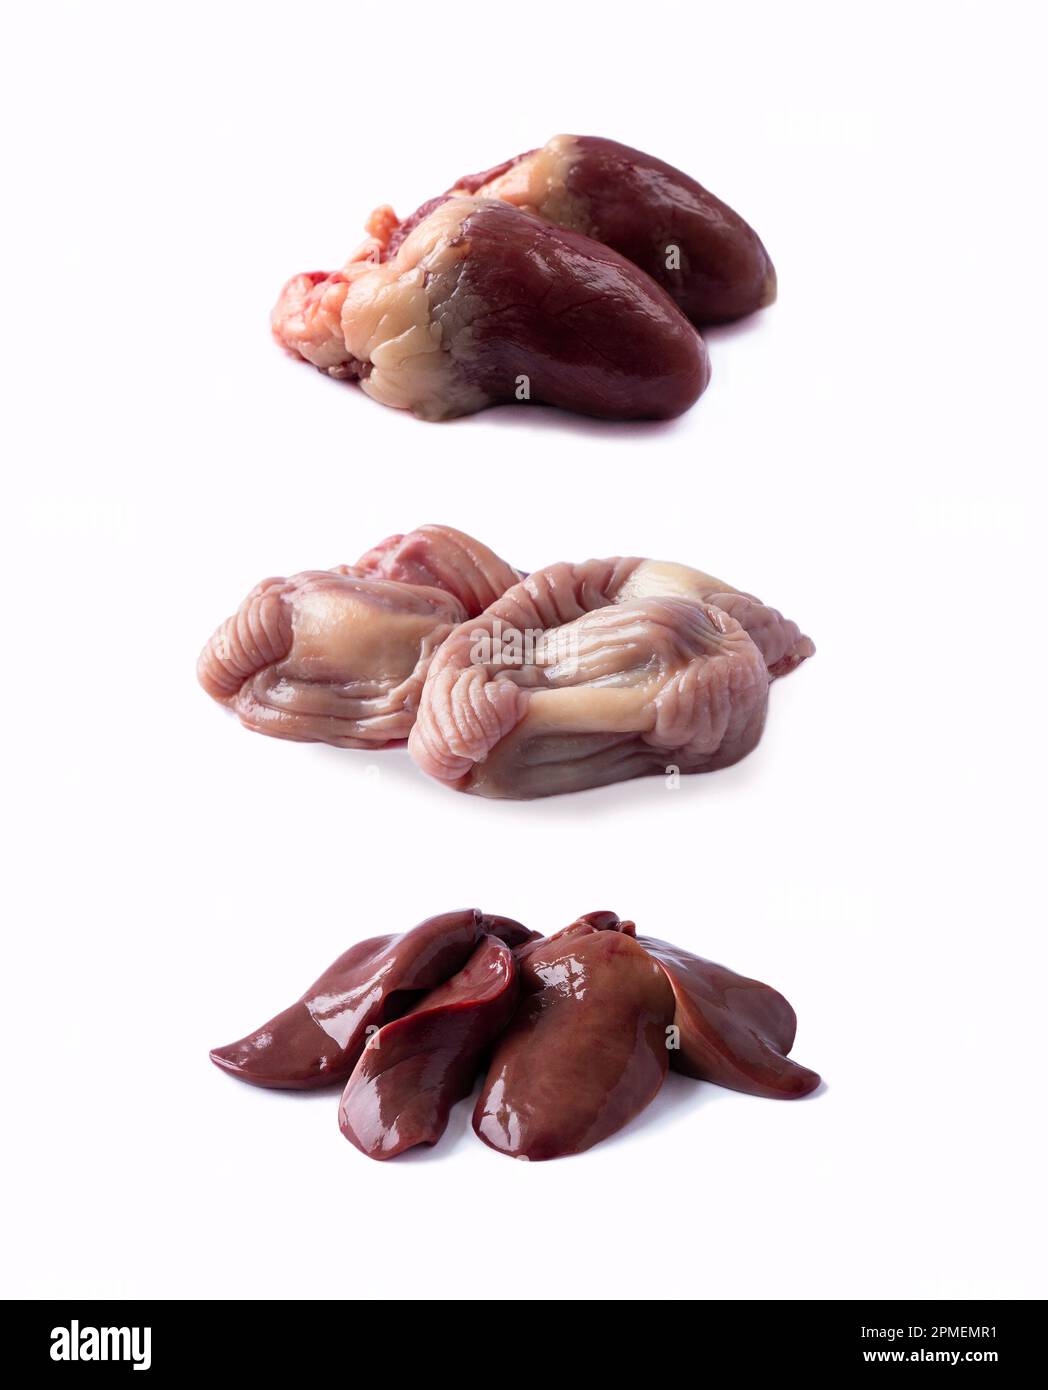 Raw сhicken Liver, stomachs and heart isolated on white background. Raw chicken offal close-up, isolated on white background. Stock Photo